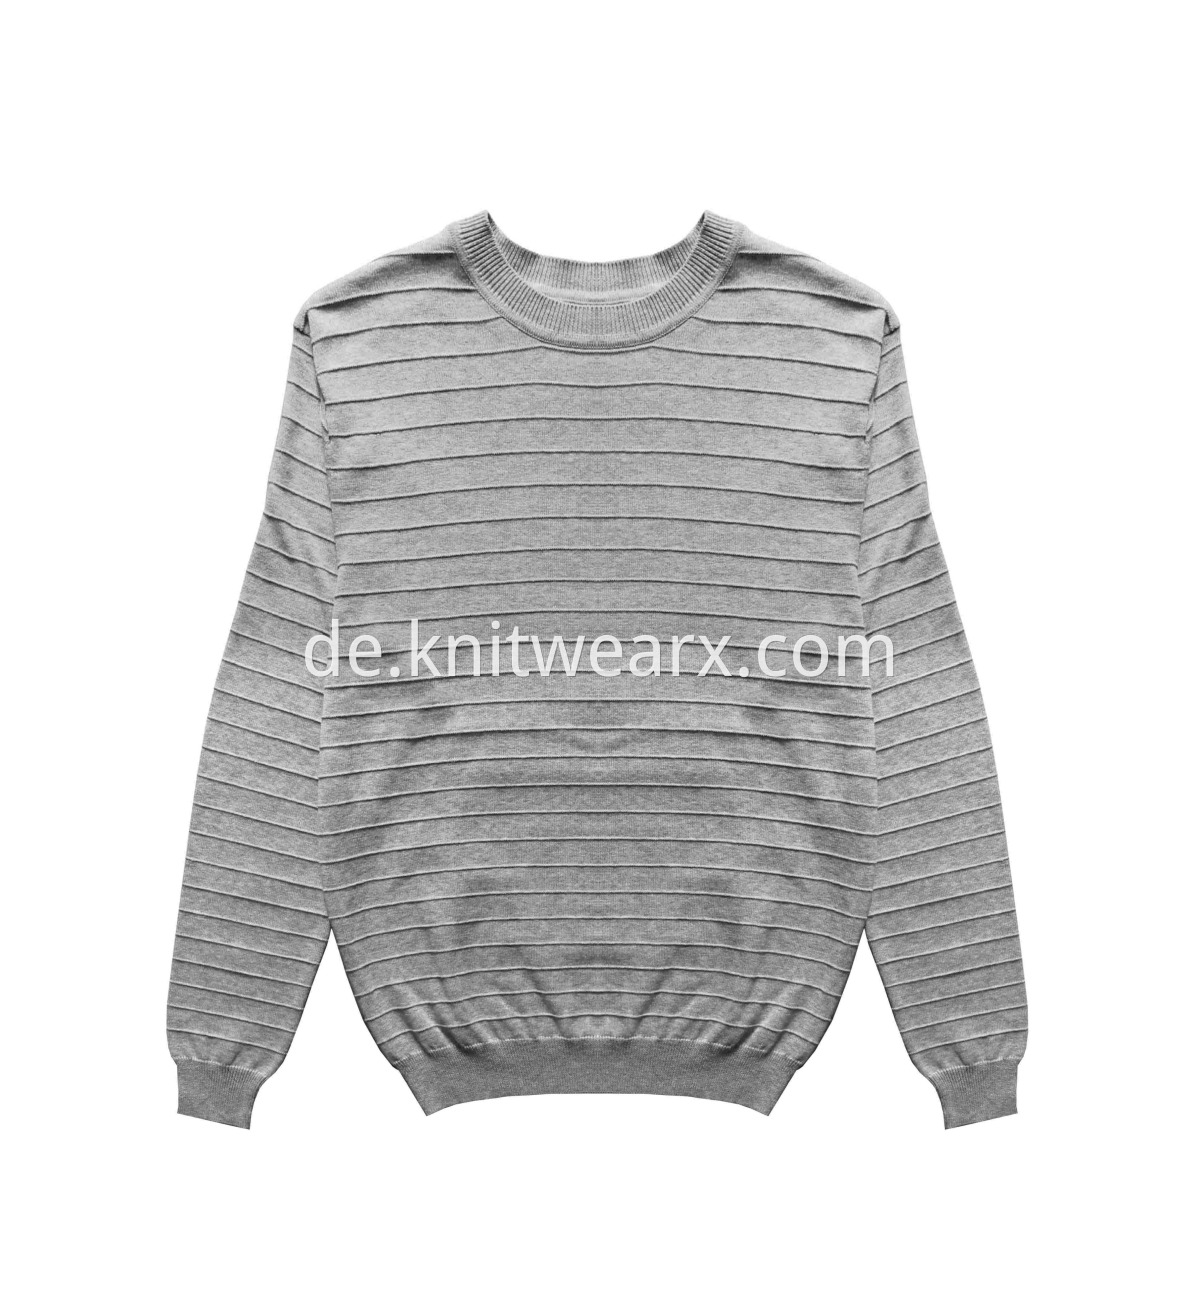 Men's Soft Knitted Sweater Striped Crewneck Pullover